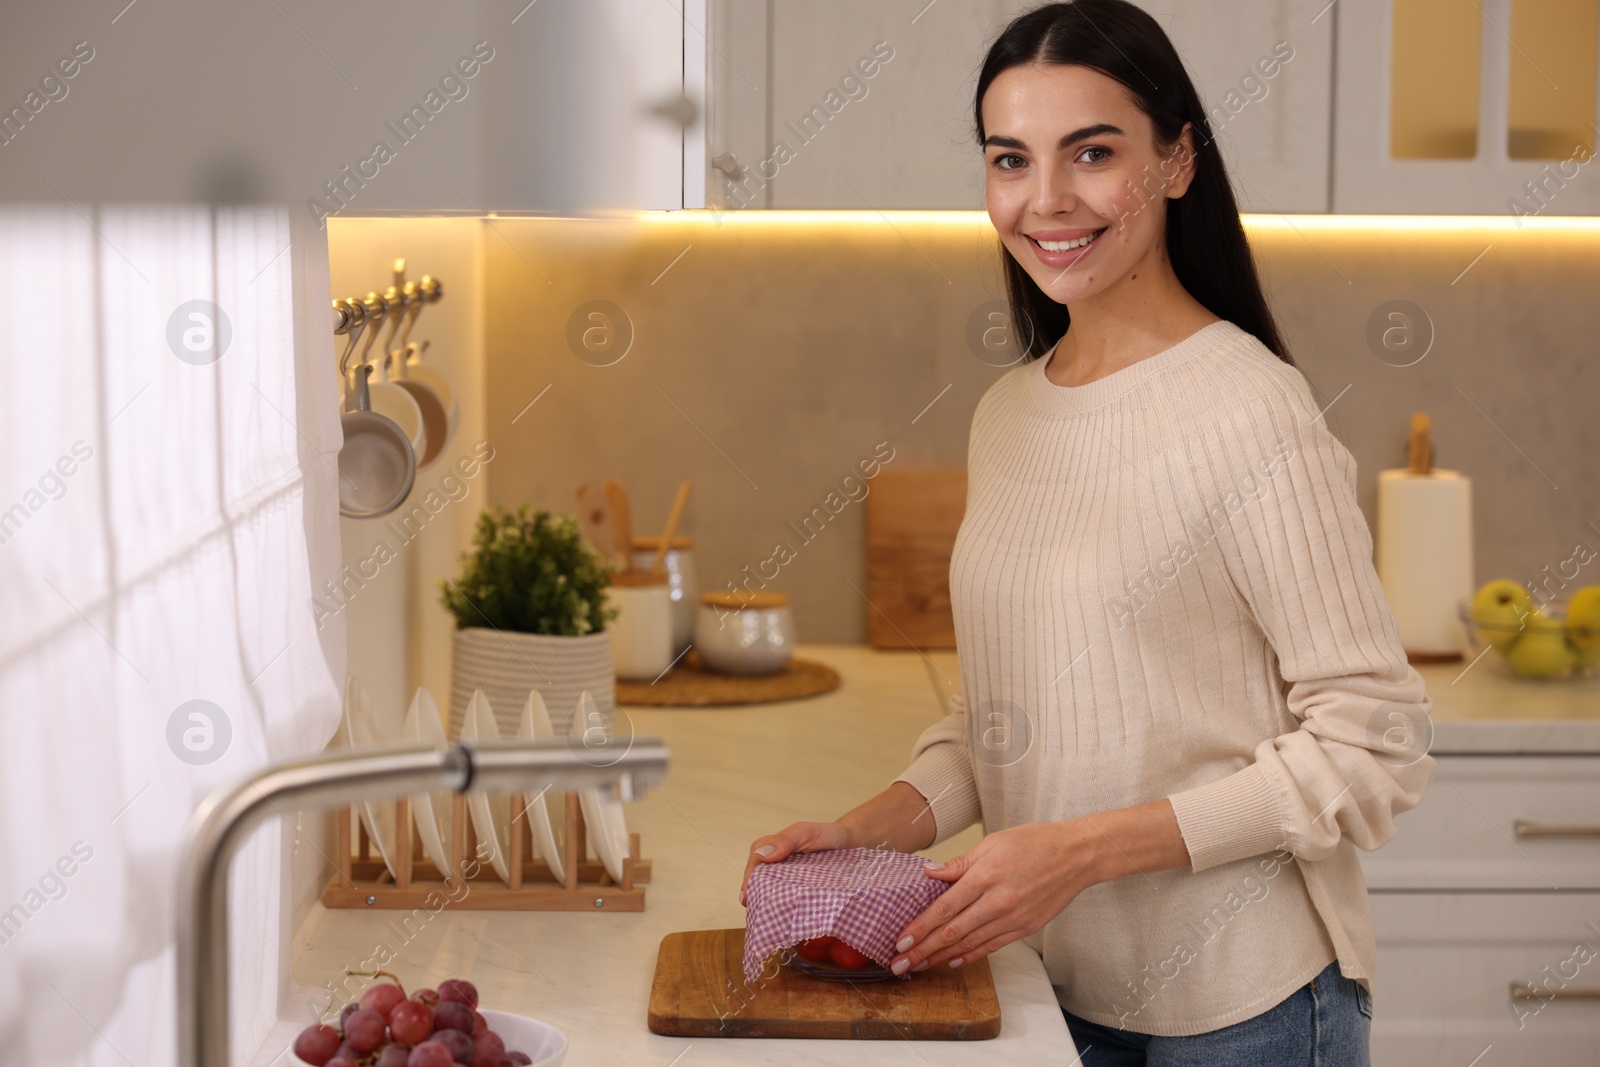 Photo of Happy woman packing bowl into beeswax food wrap at countertop in kitchen